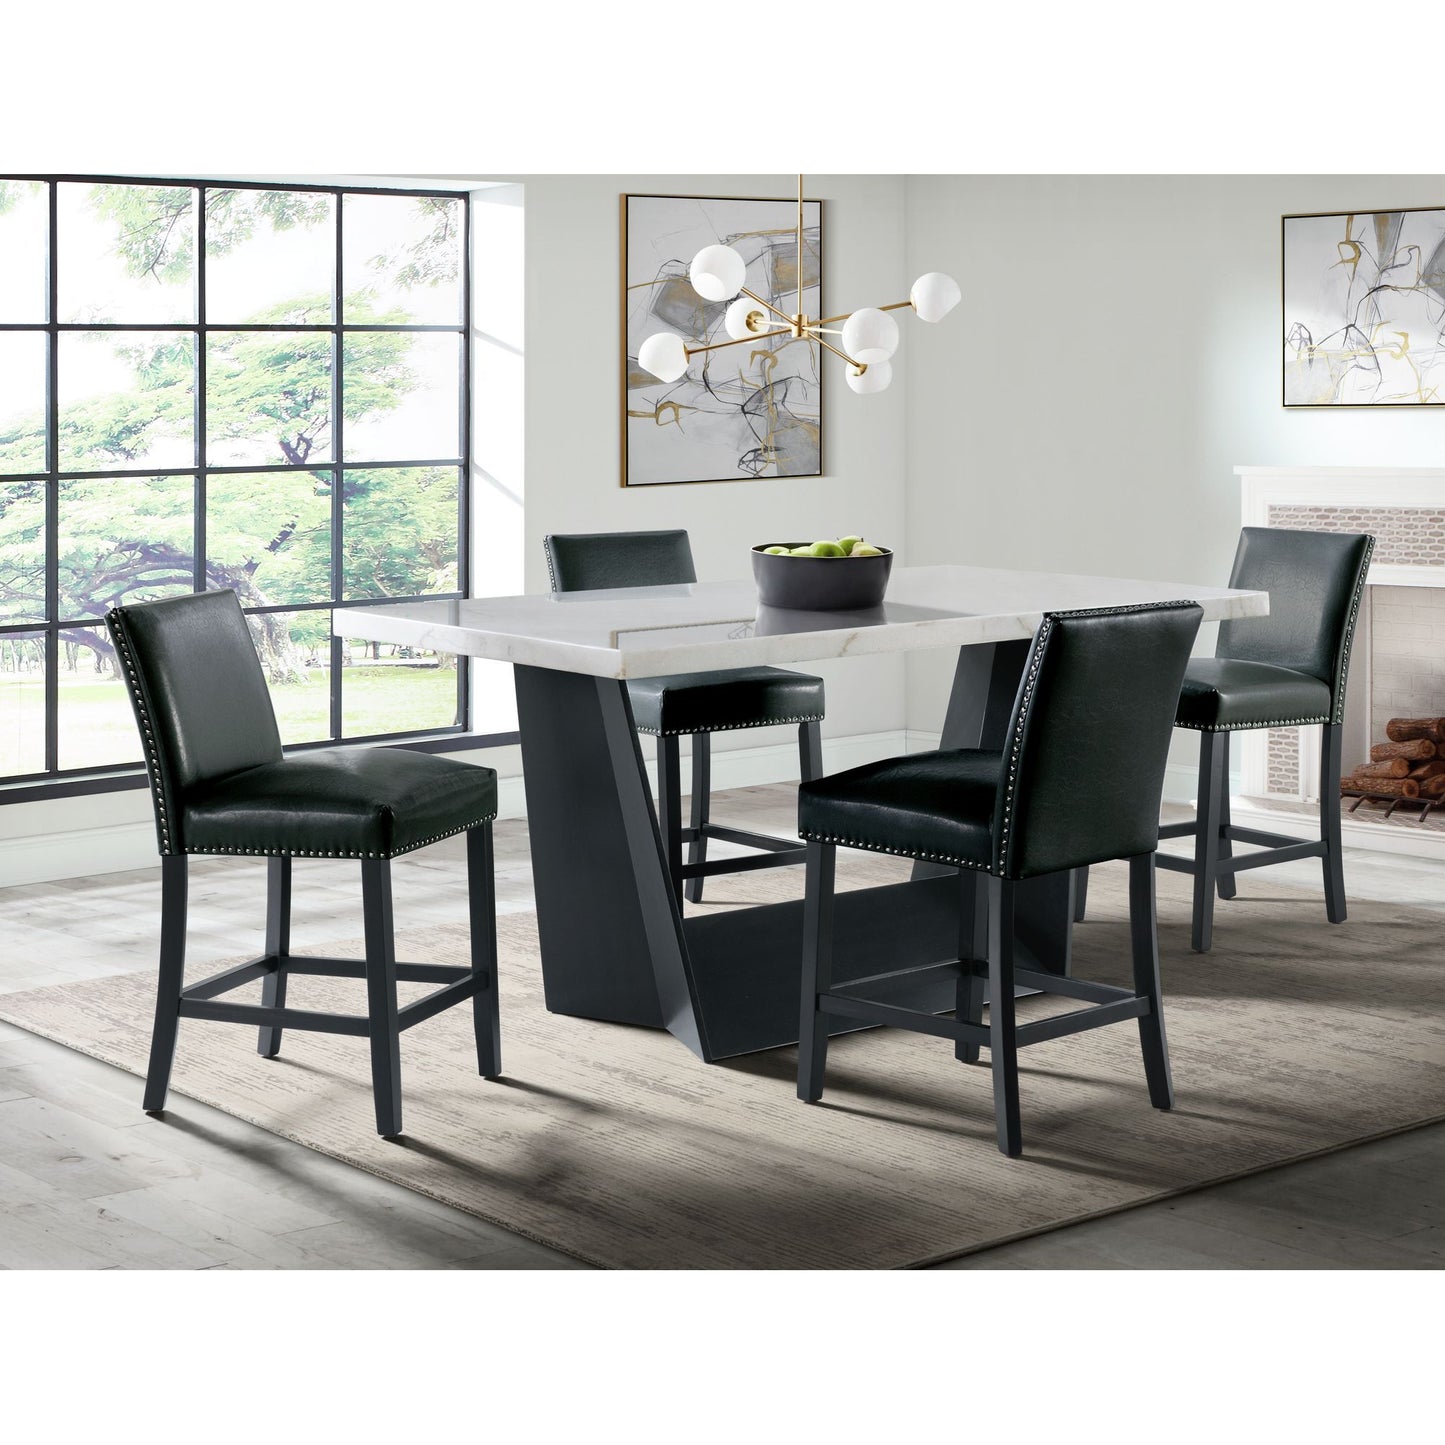 Beckley - Counter Height Dining Set